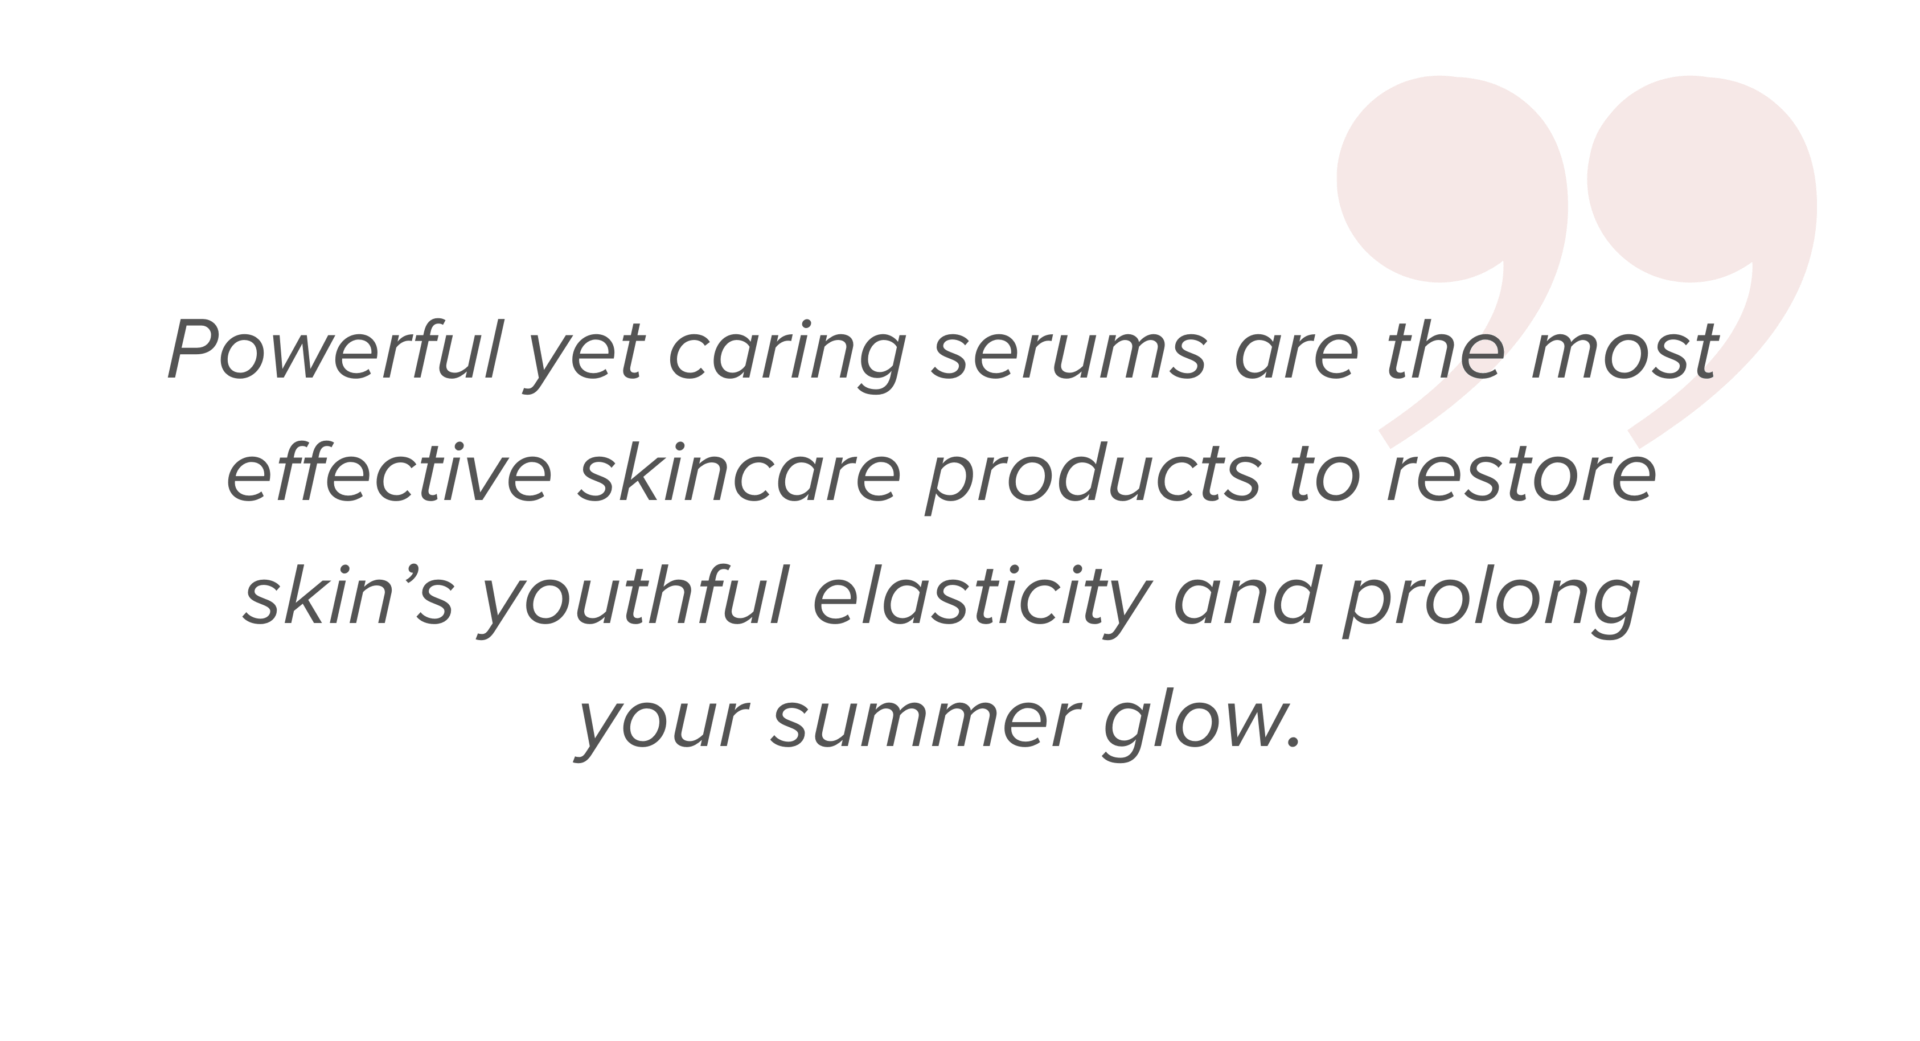 Powerful yet caring serums are the most effective skincare products to restore skin’s youthful elasticity and prolong your summer glow.